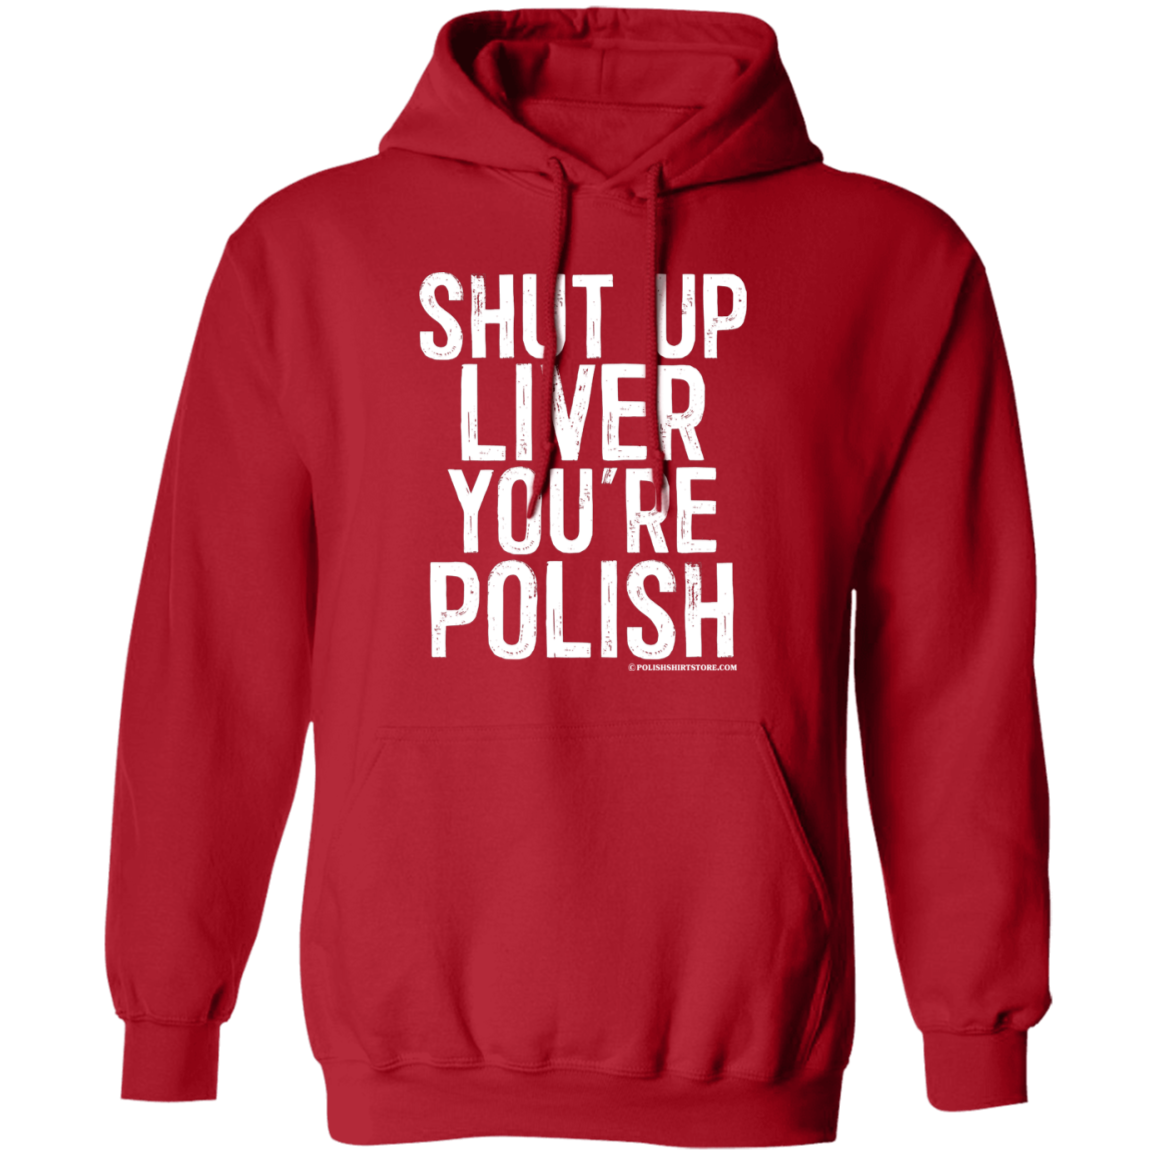 Shut Up Liver You're Polish Apparel CustomCat G185 Pullover Hoodie Red S